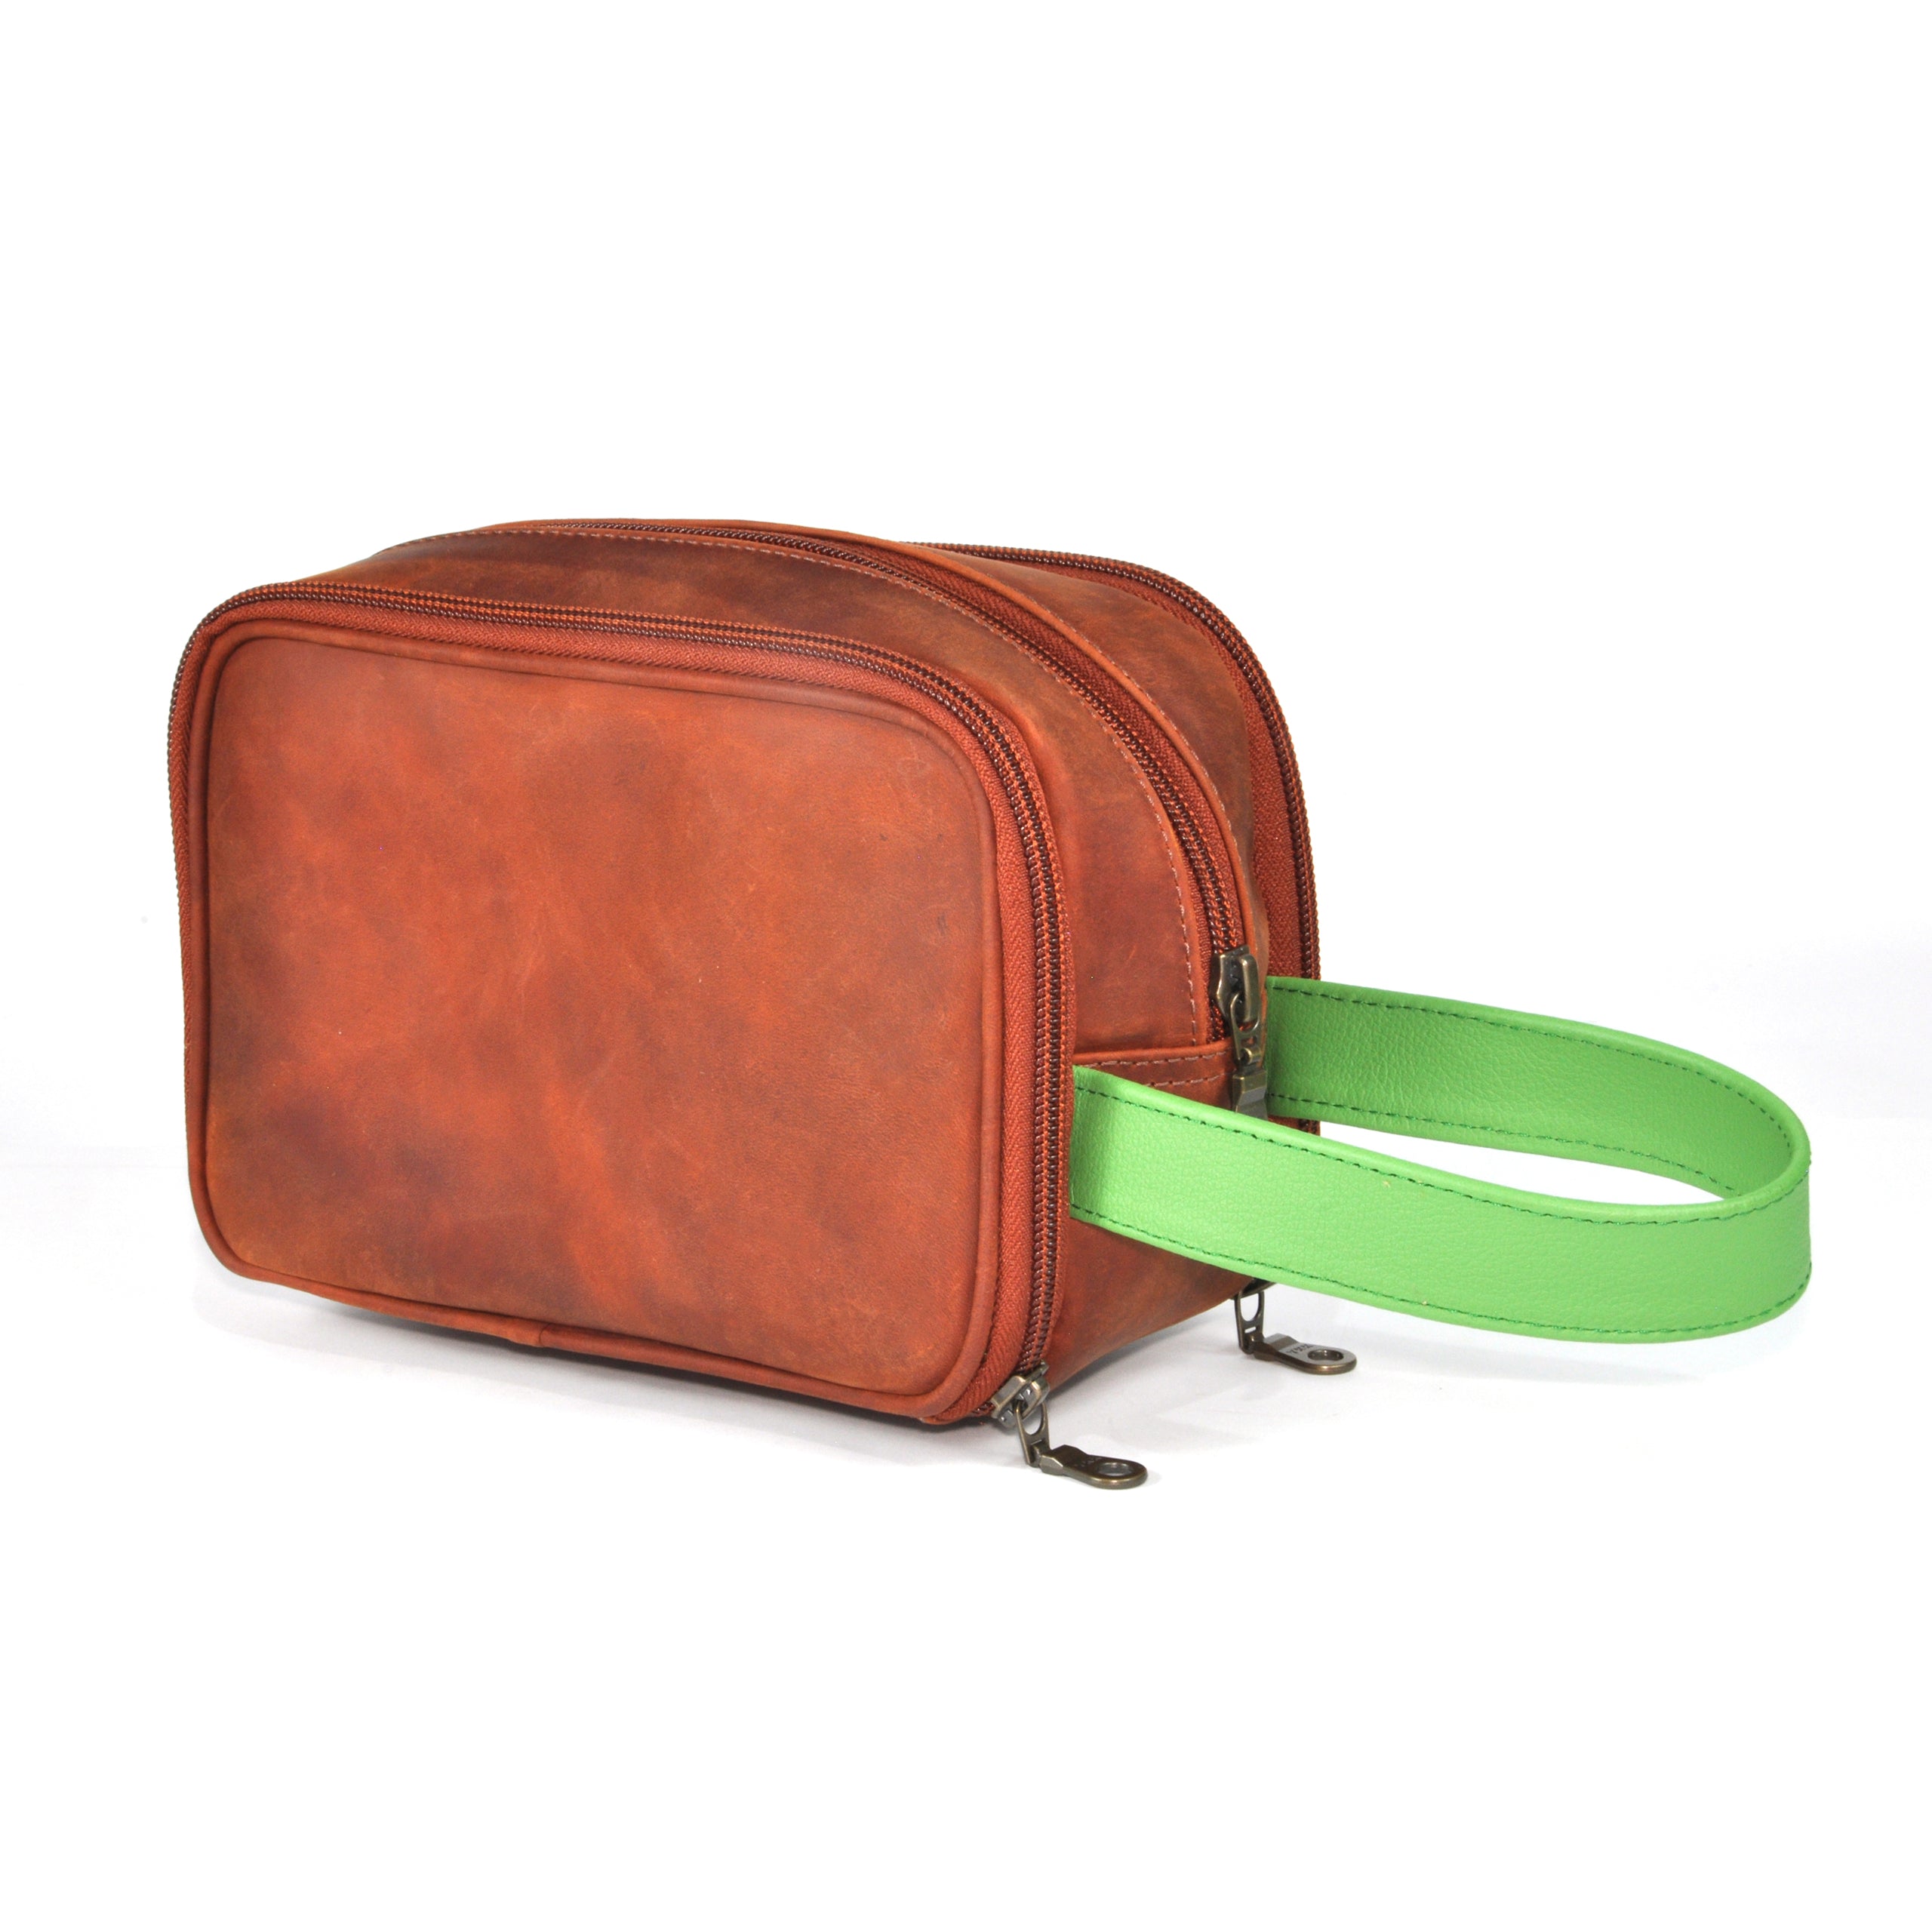 Natural Leather Pouch Bag